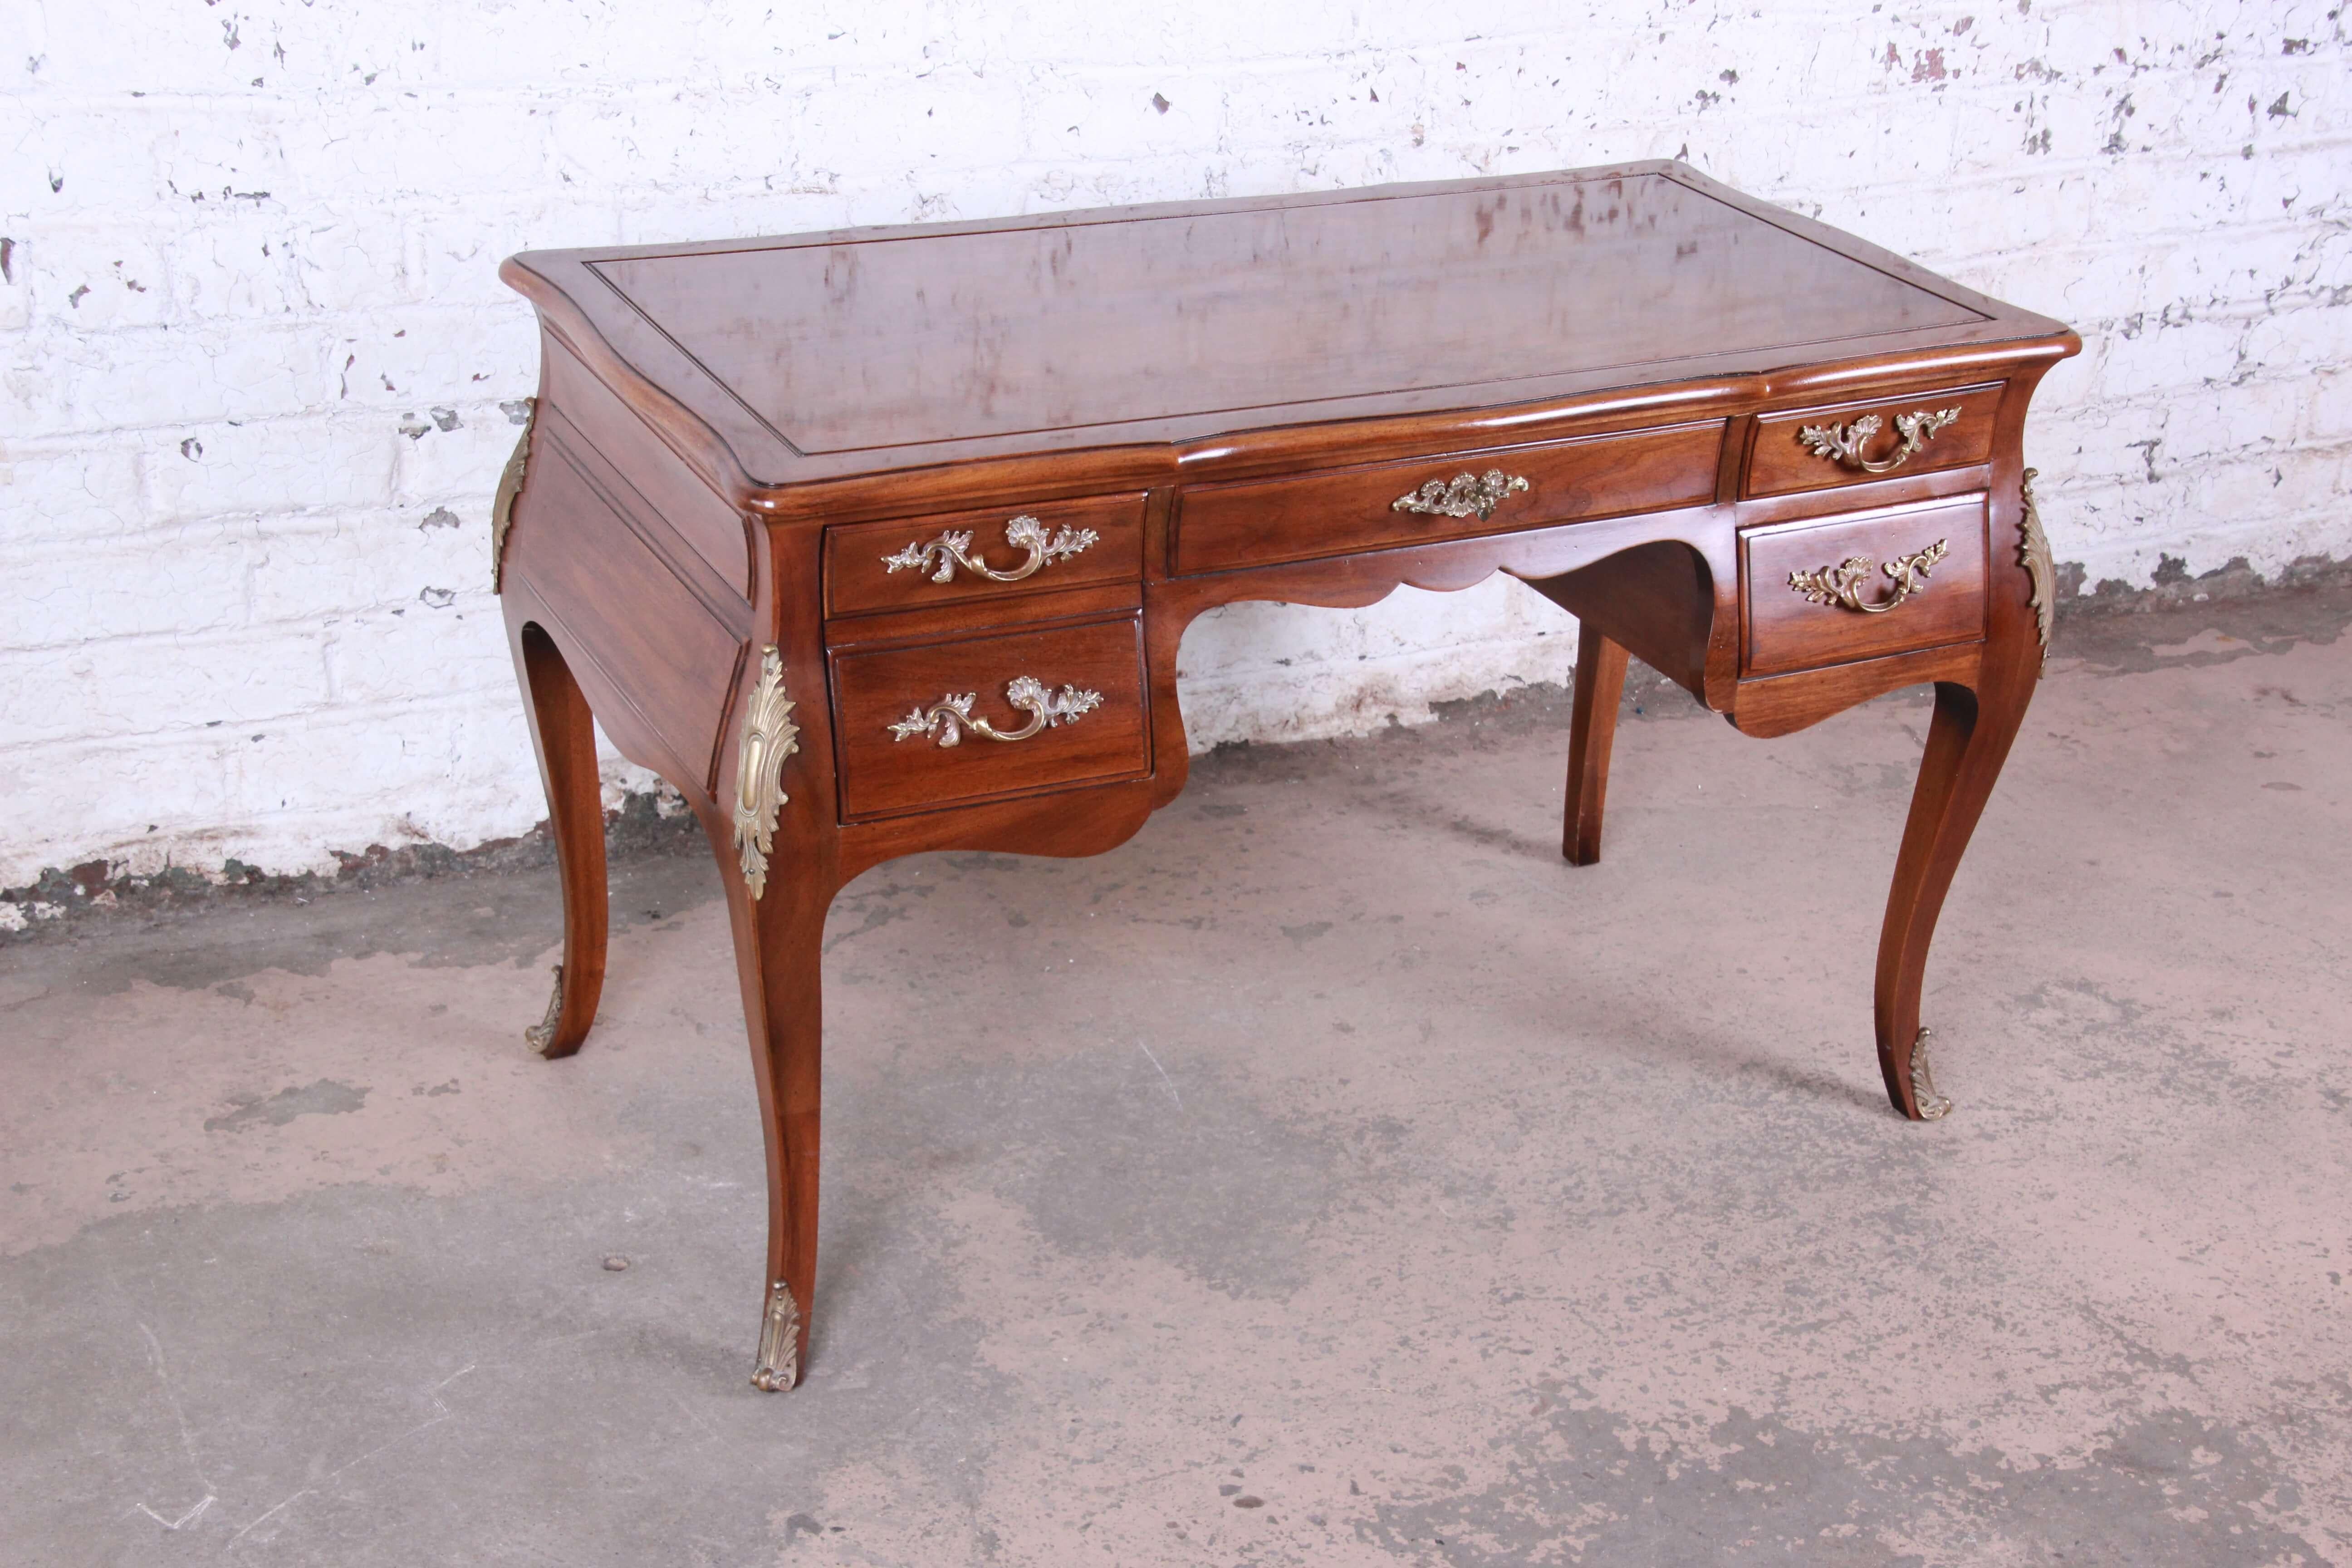 Offering an exceptional walnut French writing desk by Karges. This piece has stunning beauty with a burled walnut top and solid brass French pulls and ormolu. The writing desk offers a large file sized drawer on the left, a locking center drawer and